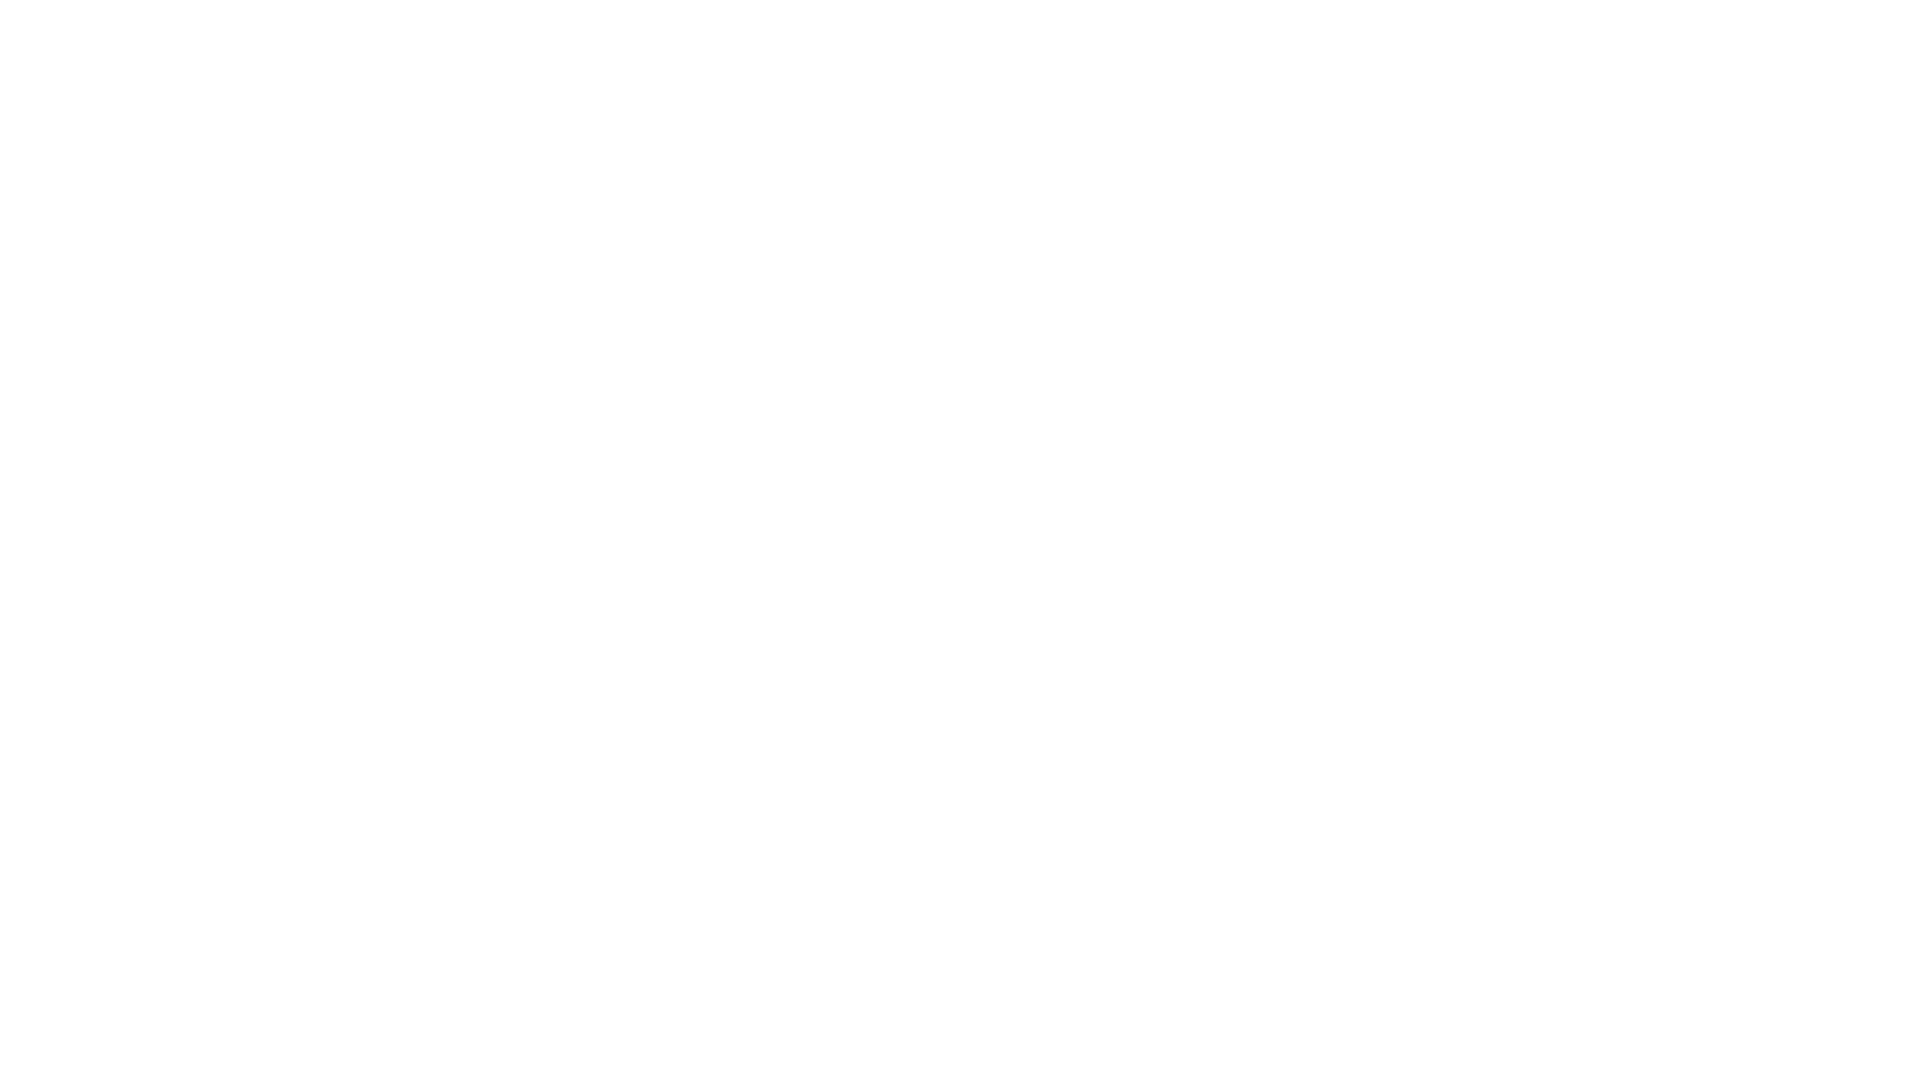 Abatec Pools - Manufacturer of above ground wooden swimming pools